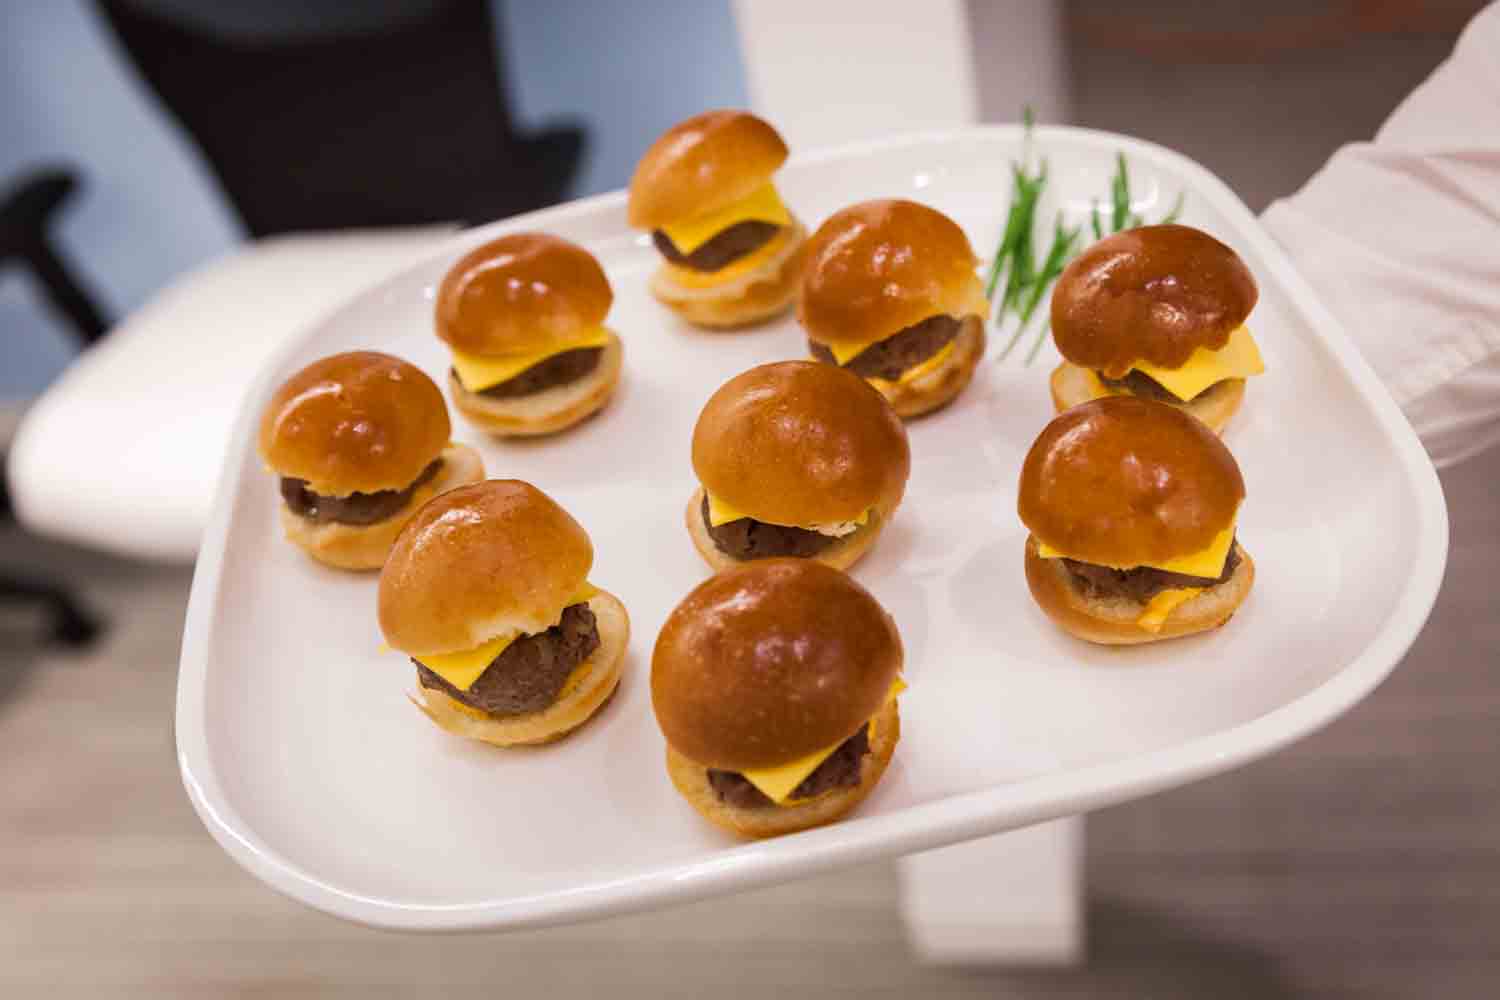 Plate of mini hamburgers served at cocktail party